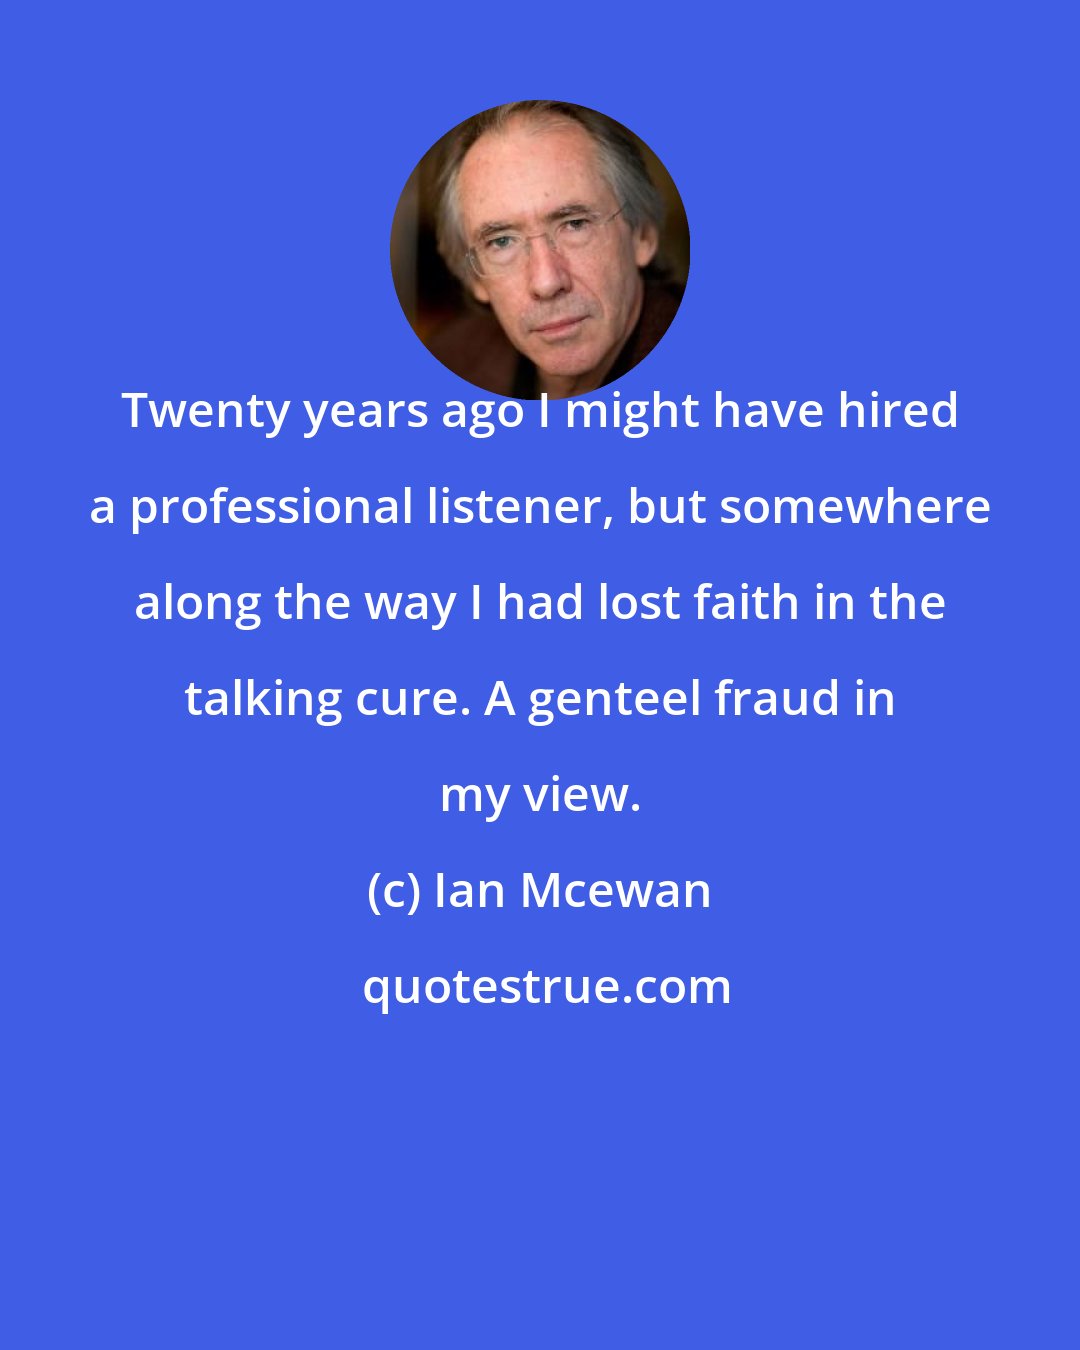 Ian Mcewan: Twenty years ago I might have hired a professional listener, but somewhere along the way I had lost faith in the talking cure. A genteel fraud in my view.